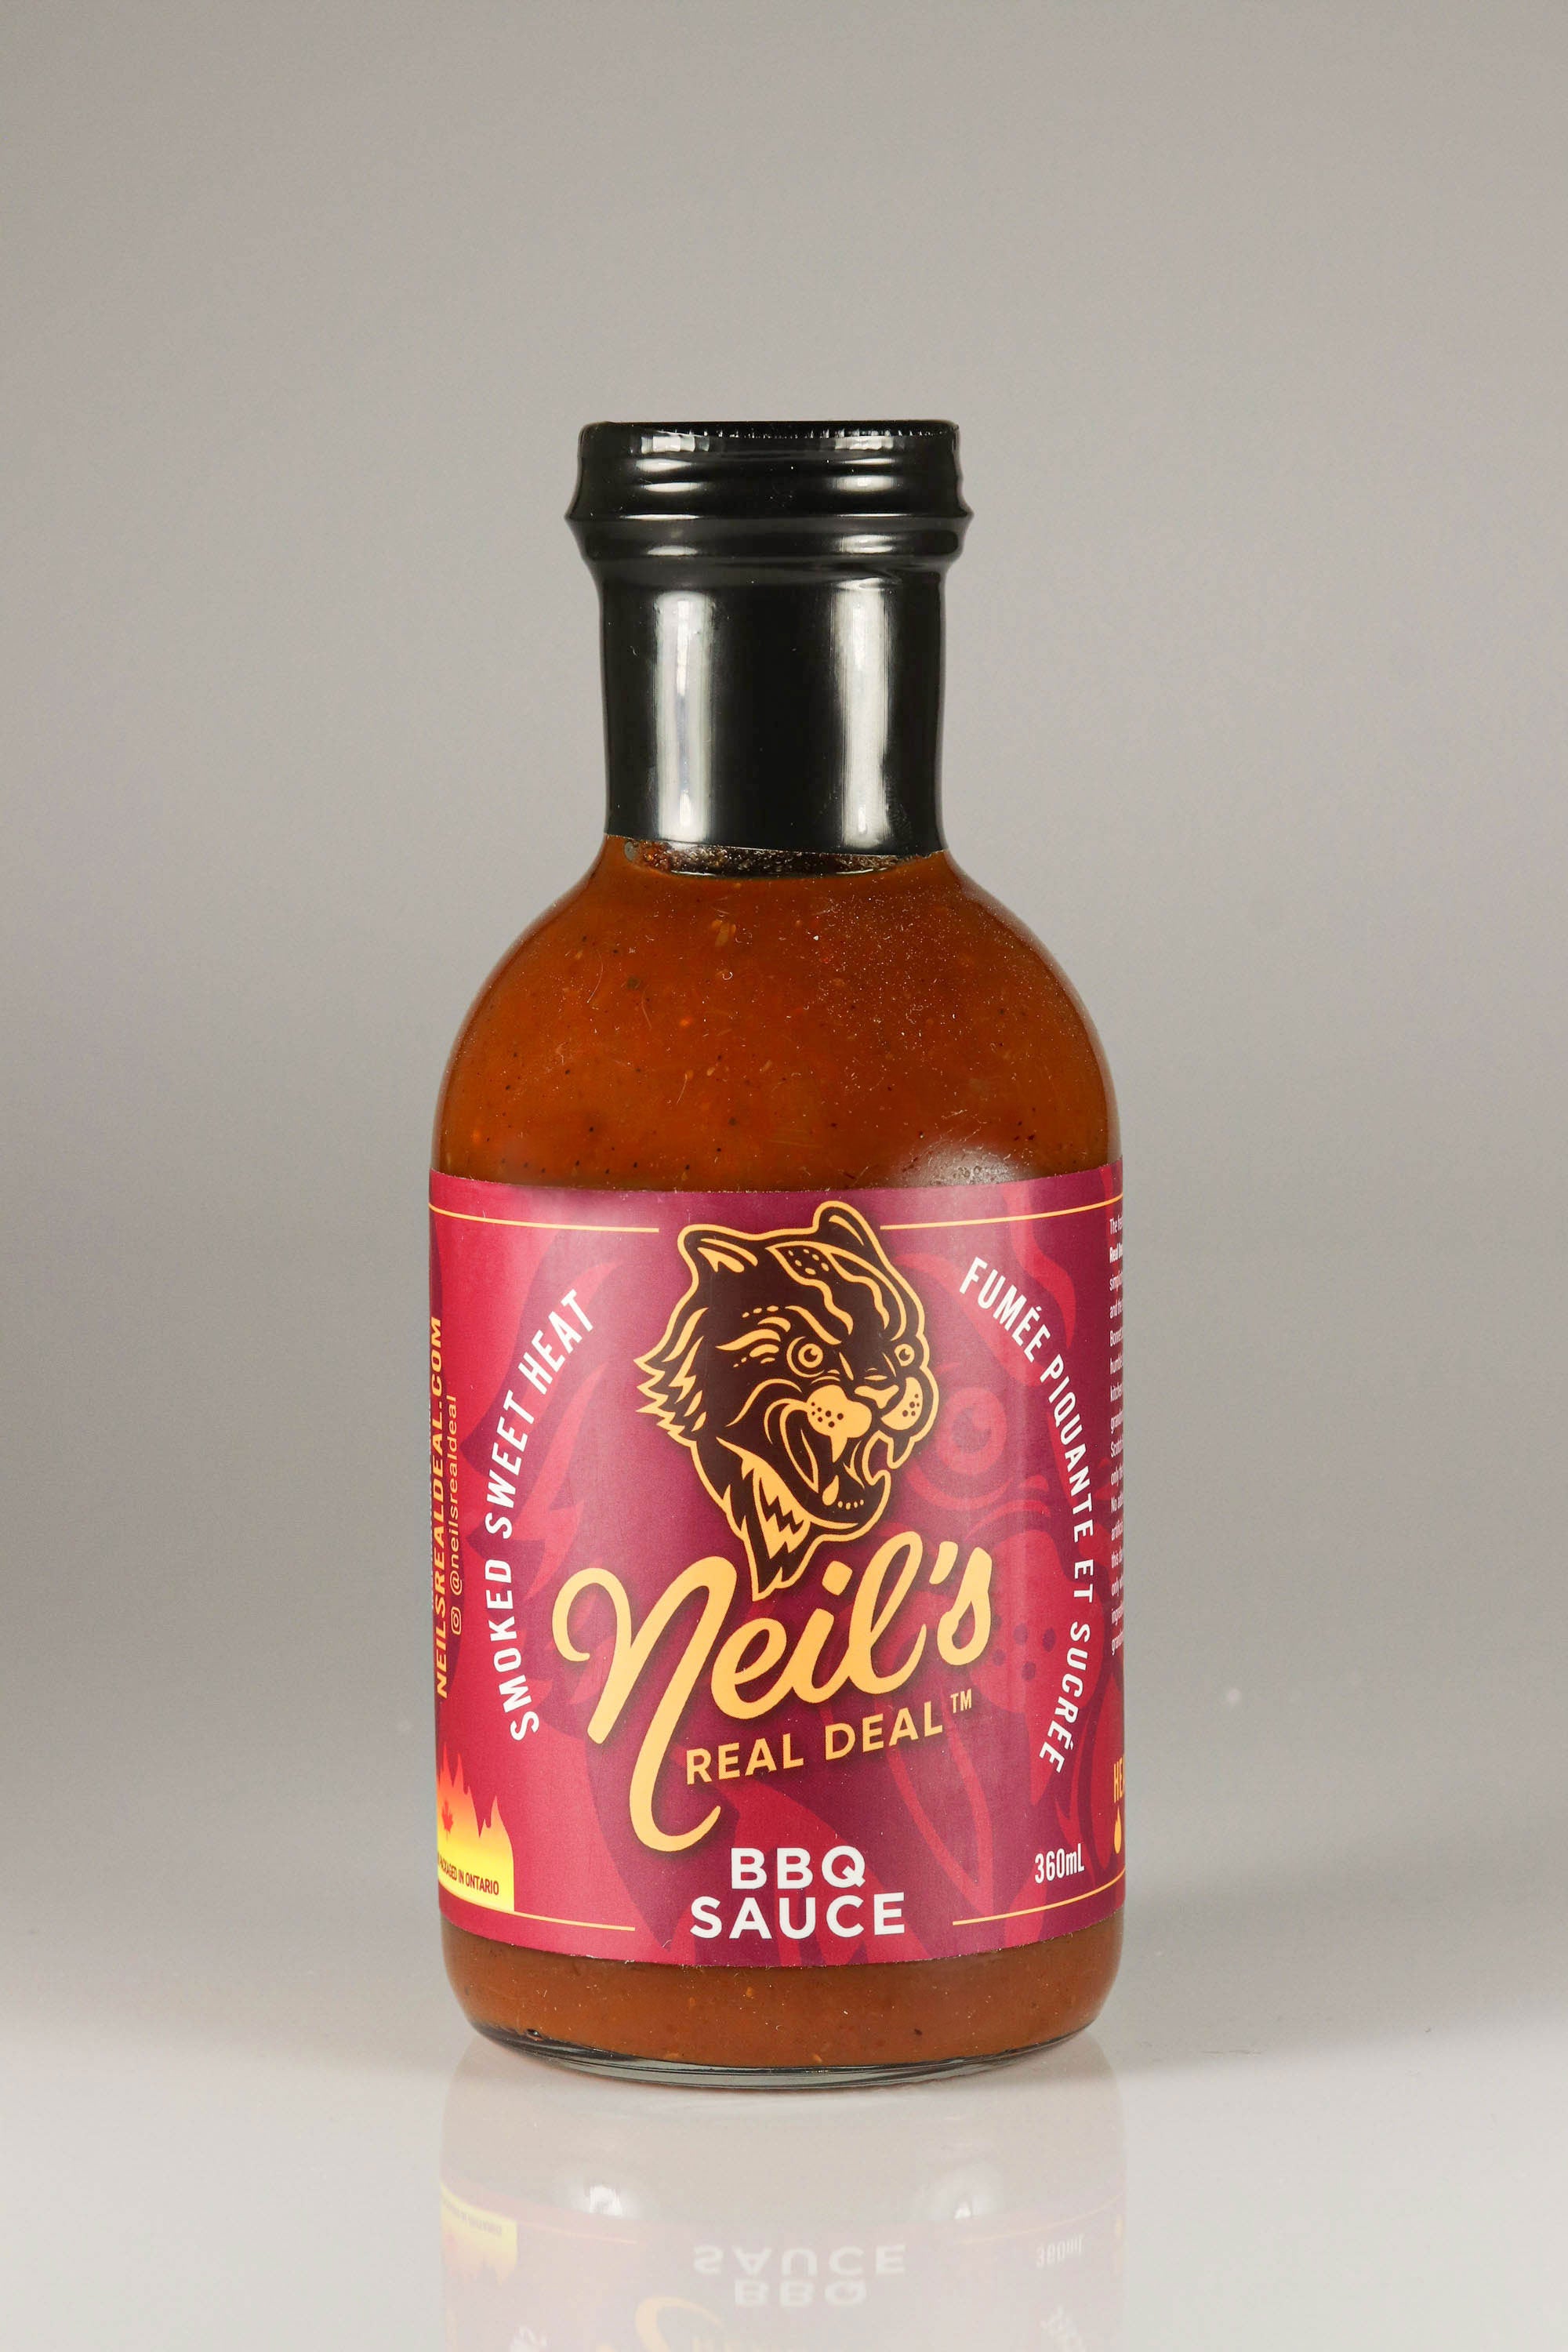 Smoked Sweet Heat BBQ Sauce - Neil's Real Deal